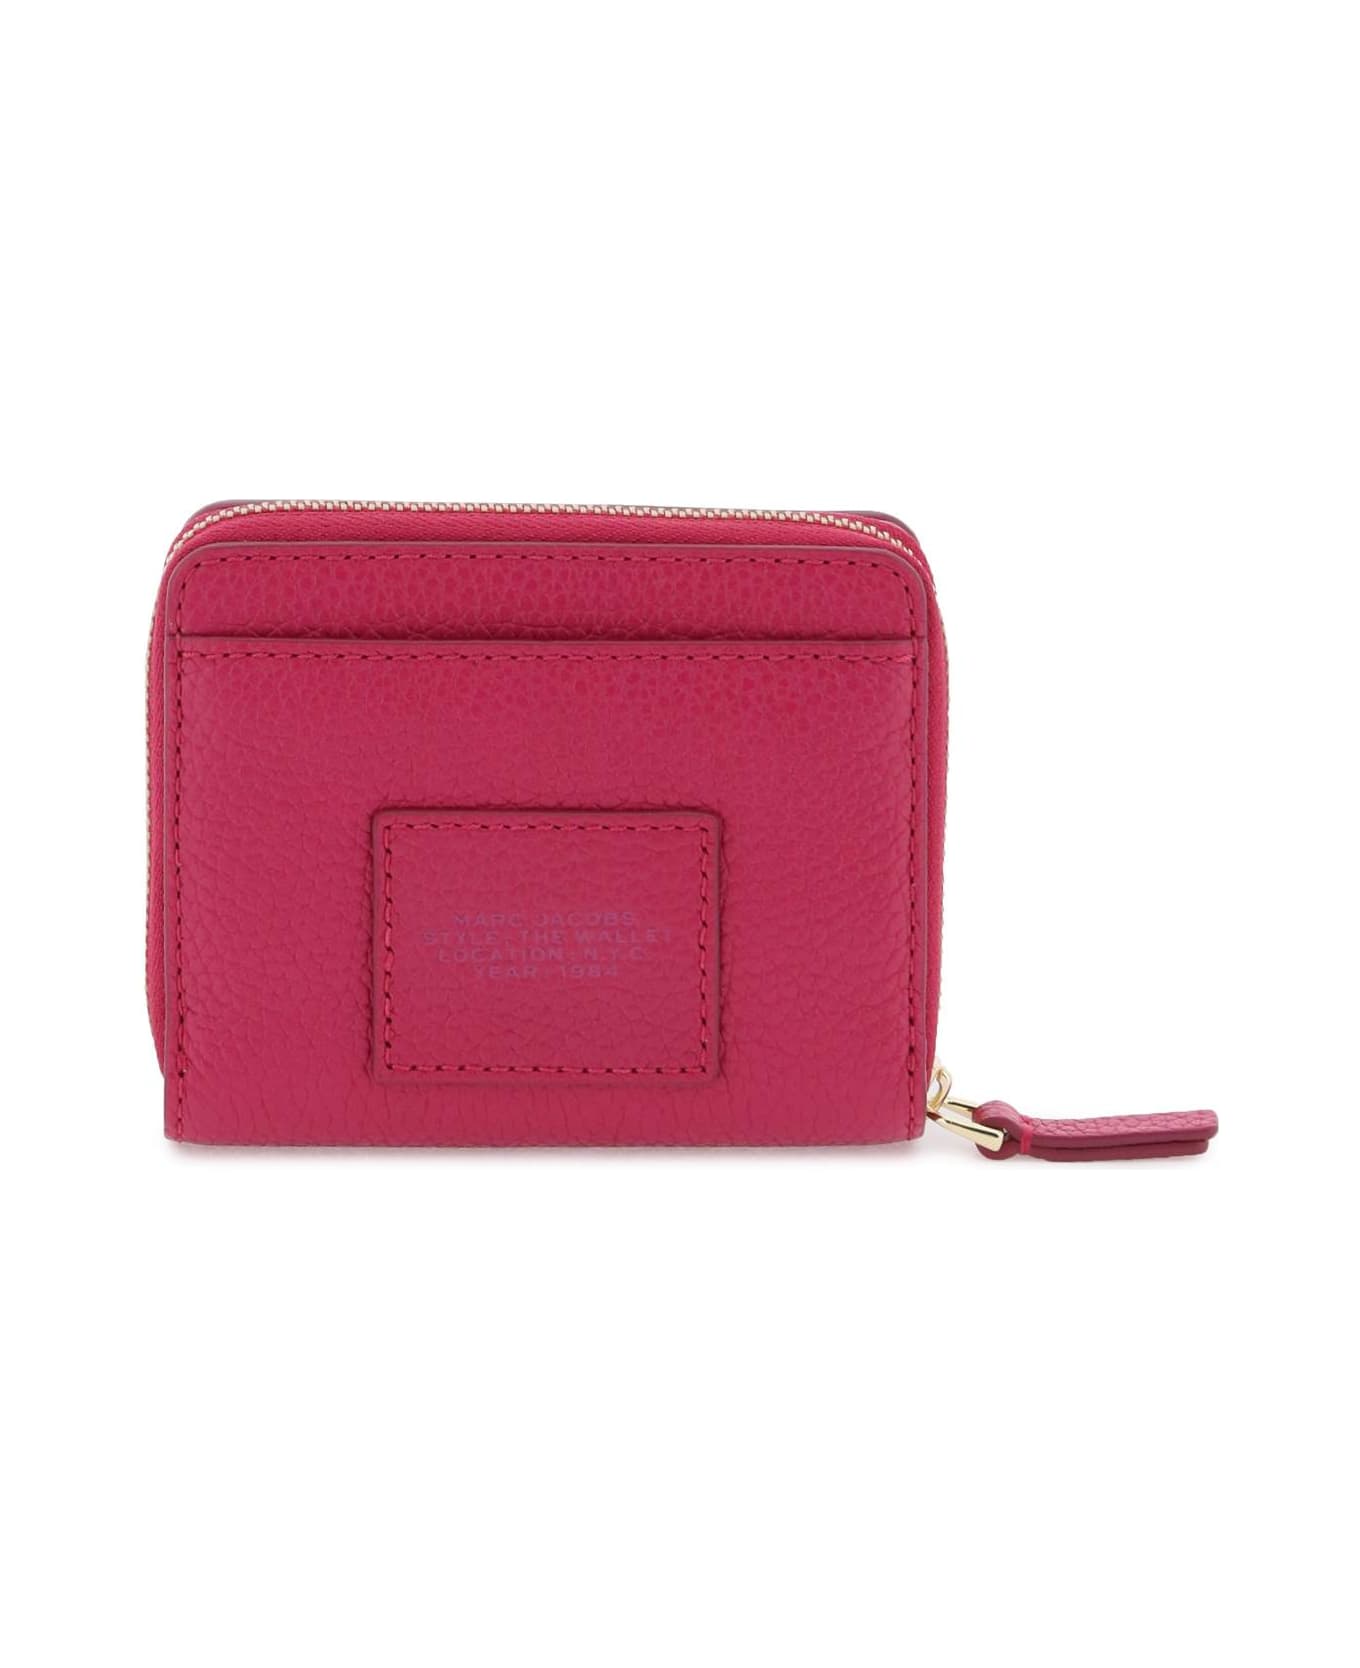 Marc Jacobs Leather Mini Compact Wallet - LIPSTICK PINK (Fuchsia) 財布